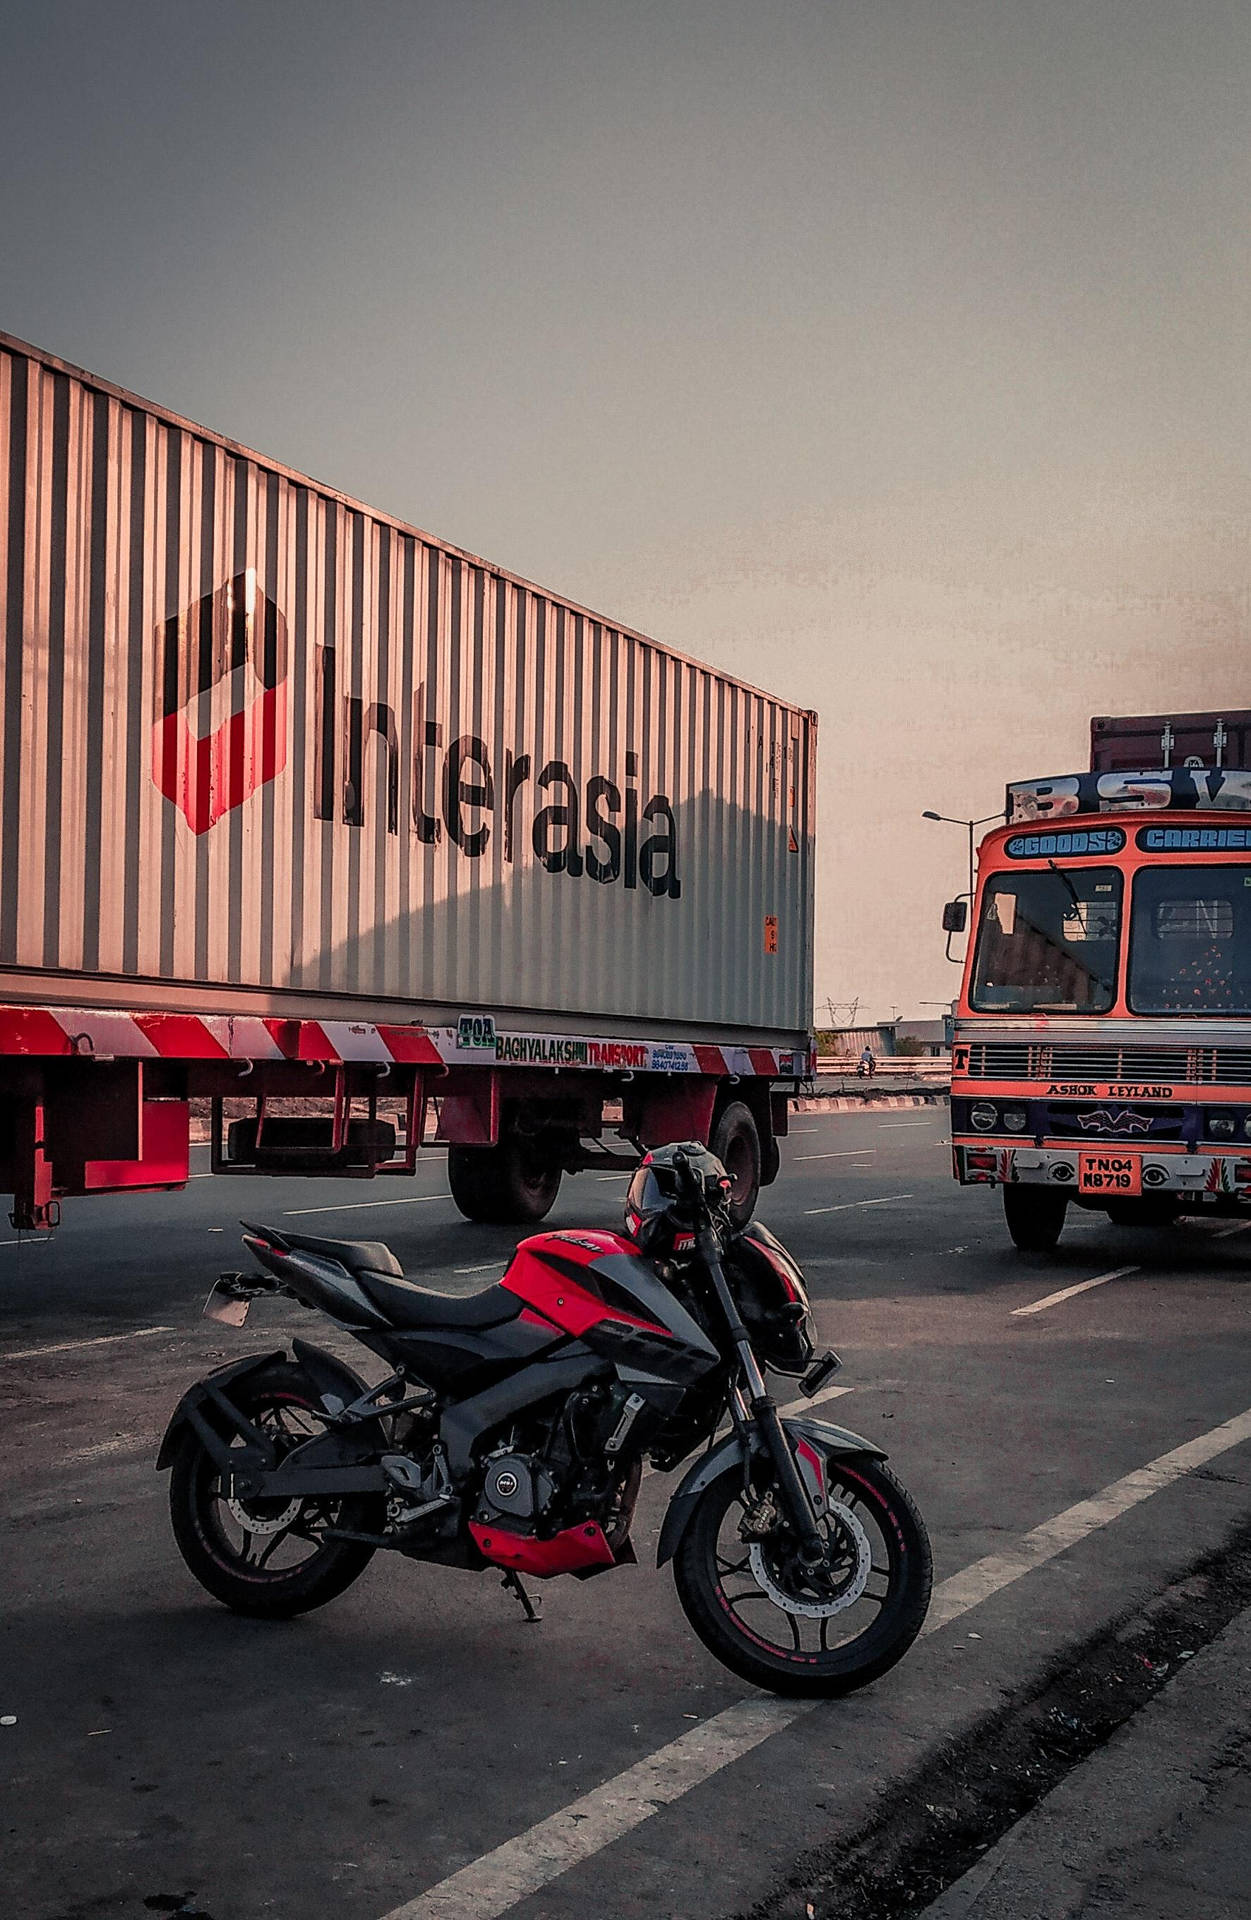 NS 200 Black And Red Motorcycle Near Truck Wallpaper